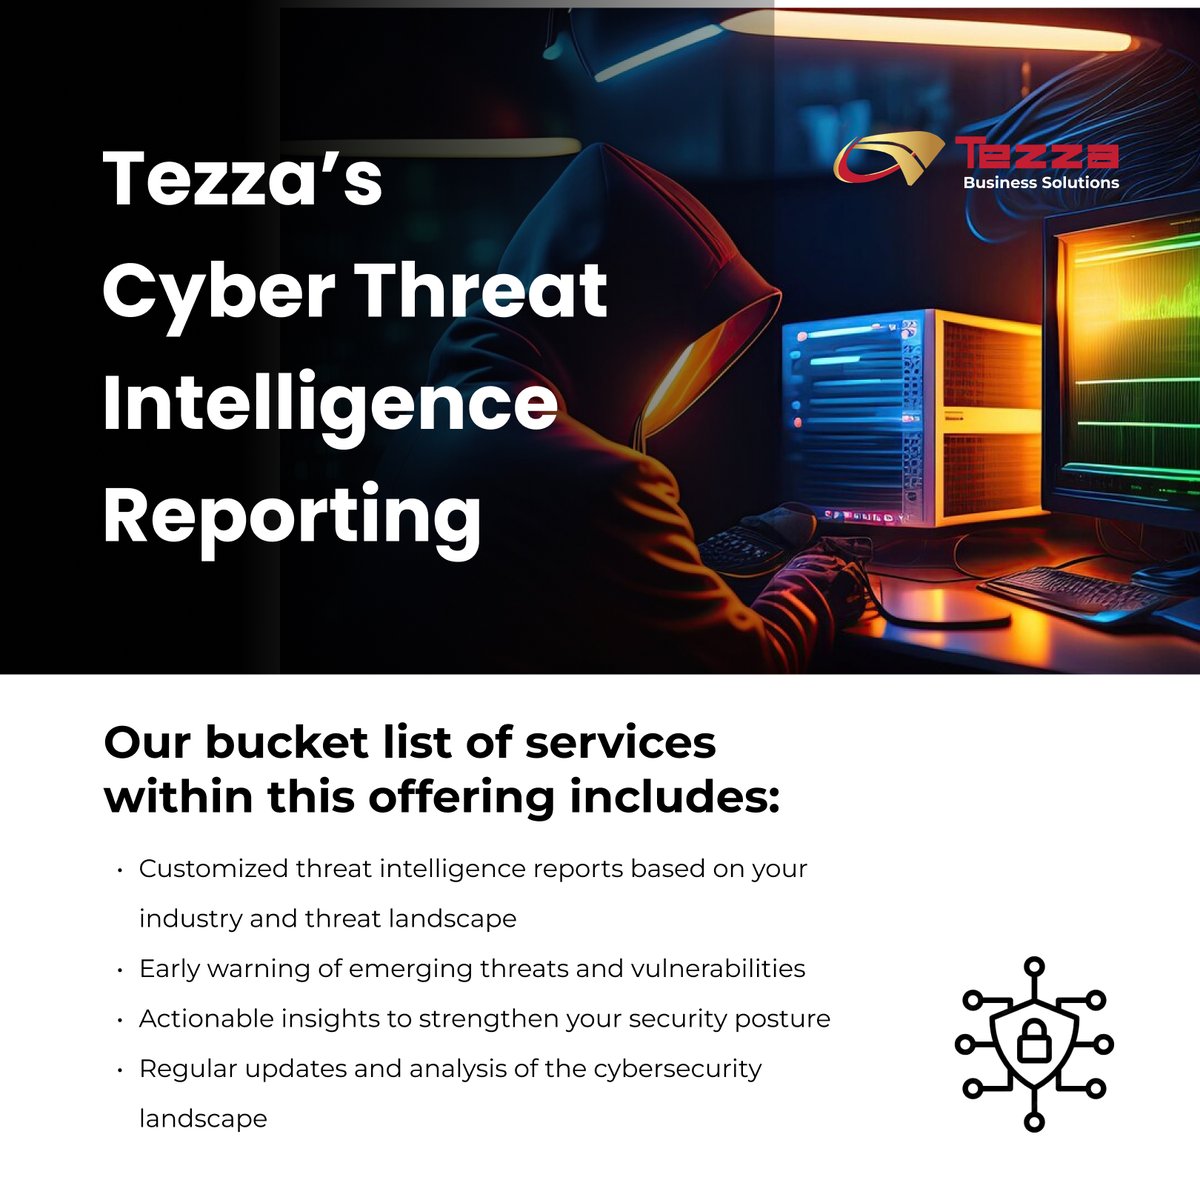 Stay ahead of the curve with up-to-date cyber threat intelligence. We provide customized reports on emerging threats, targeted attack campaigns, & industry-specific vulnerabilities, helping you proactively address potential risks.  🔒💻

#CyberSecurity #ThreatIntelligence